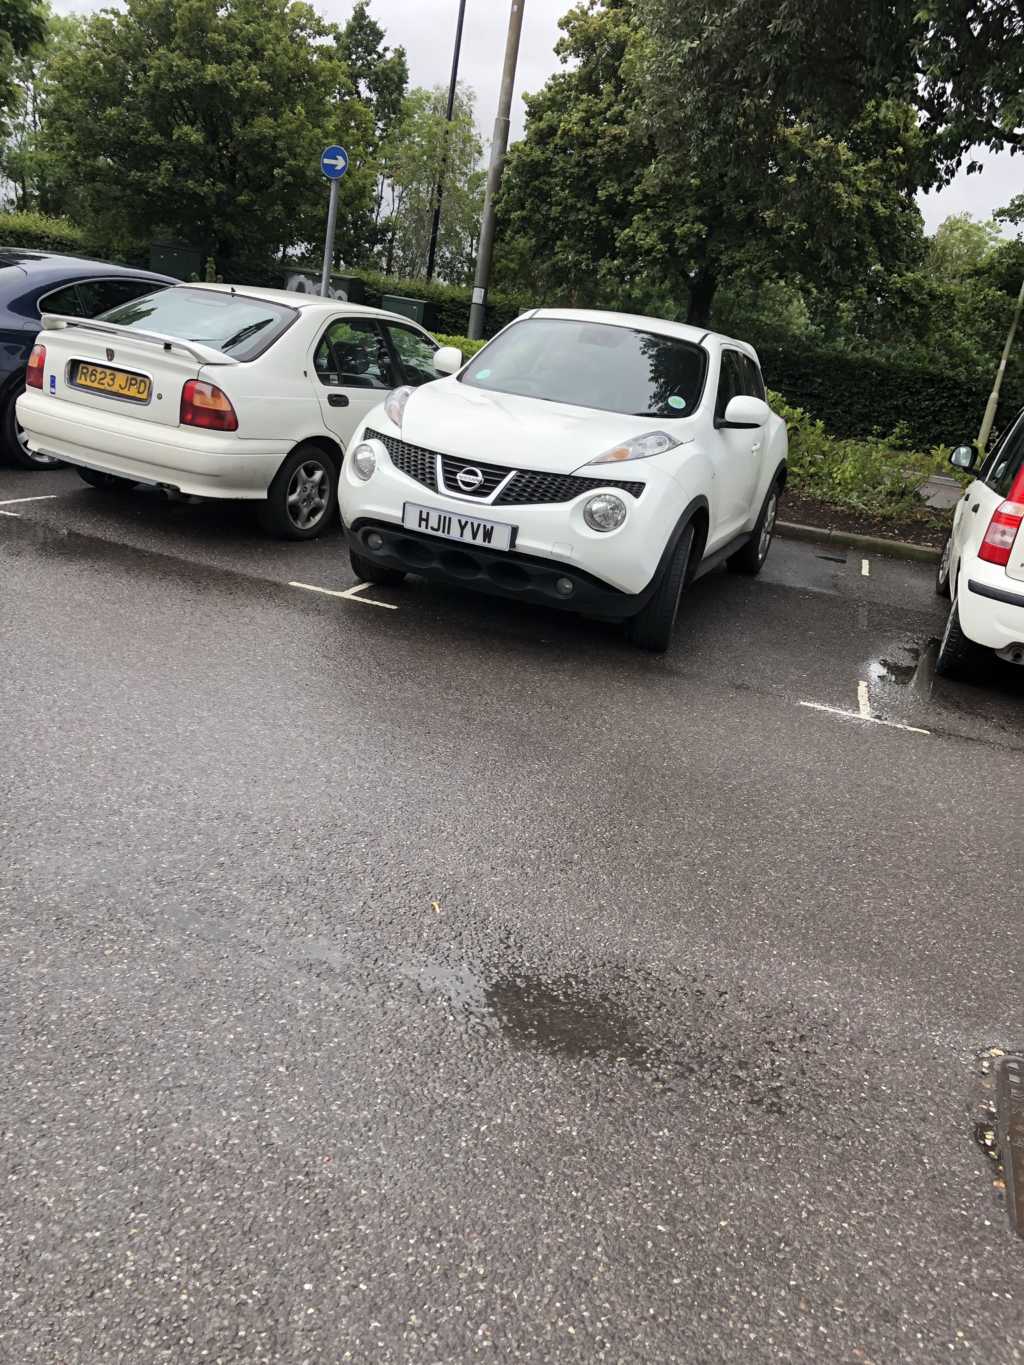 HJ11 YVW is an Inconsiderate Parker